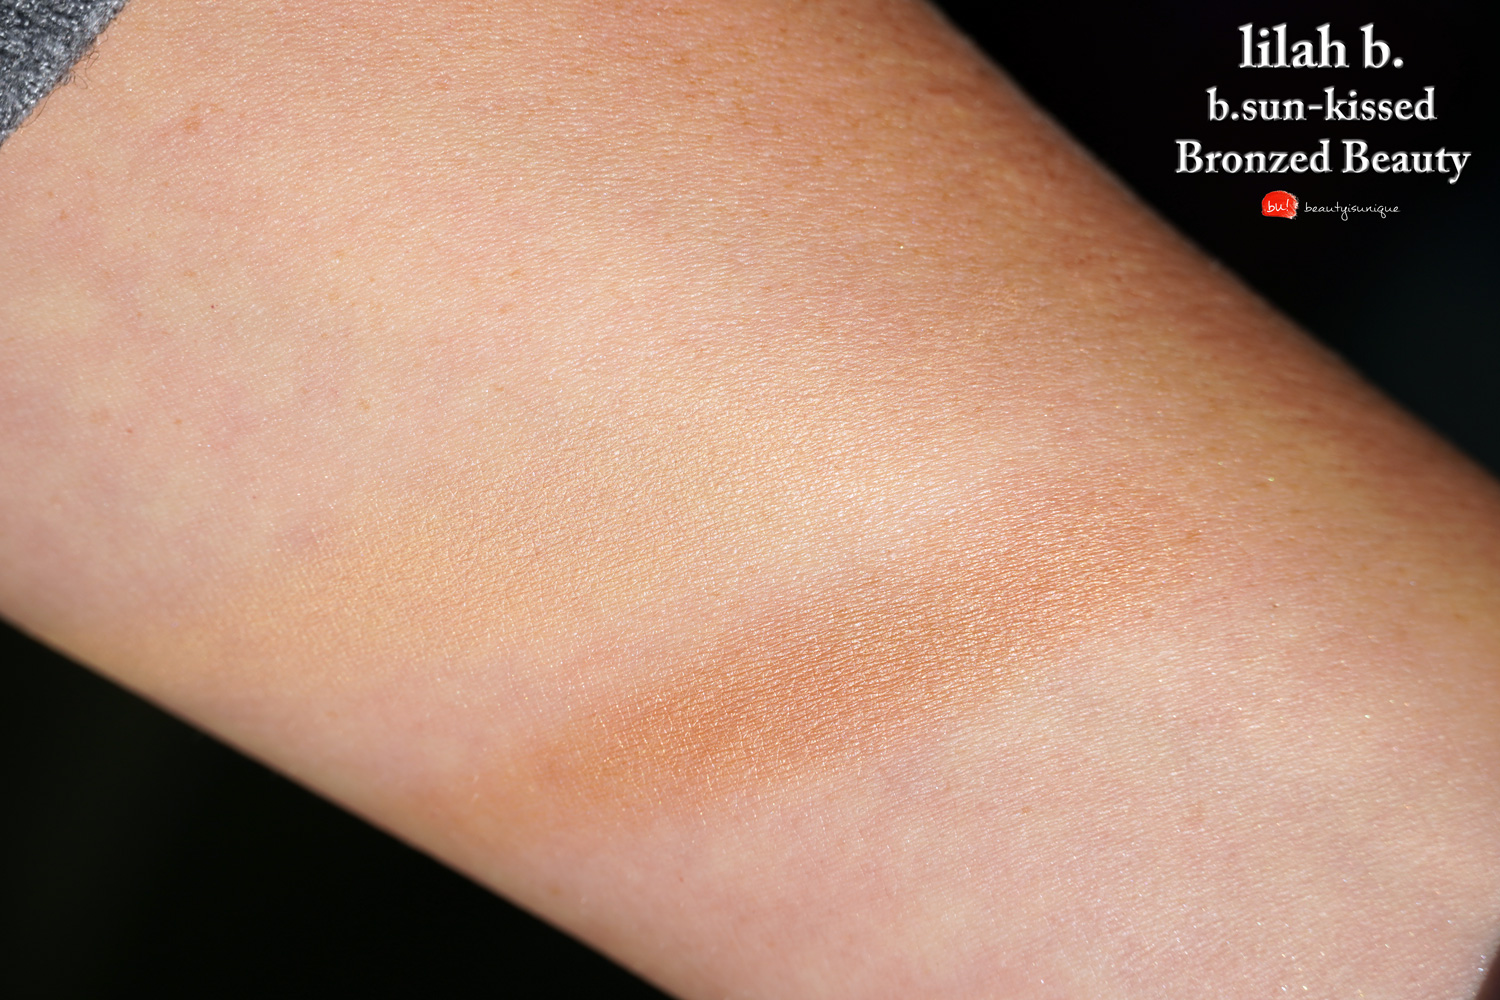 lilah-b-sun-kissed-bronzed-beauty-swatches